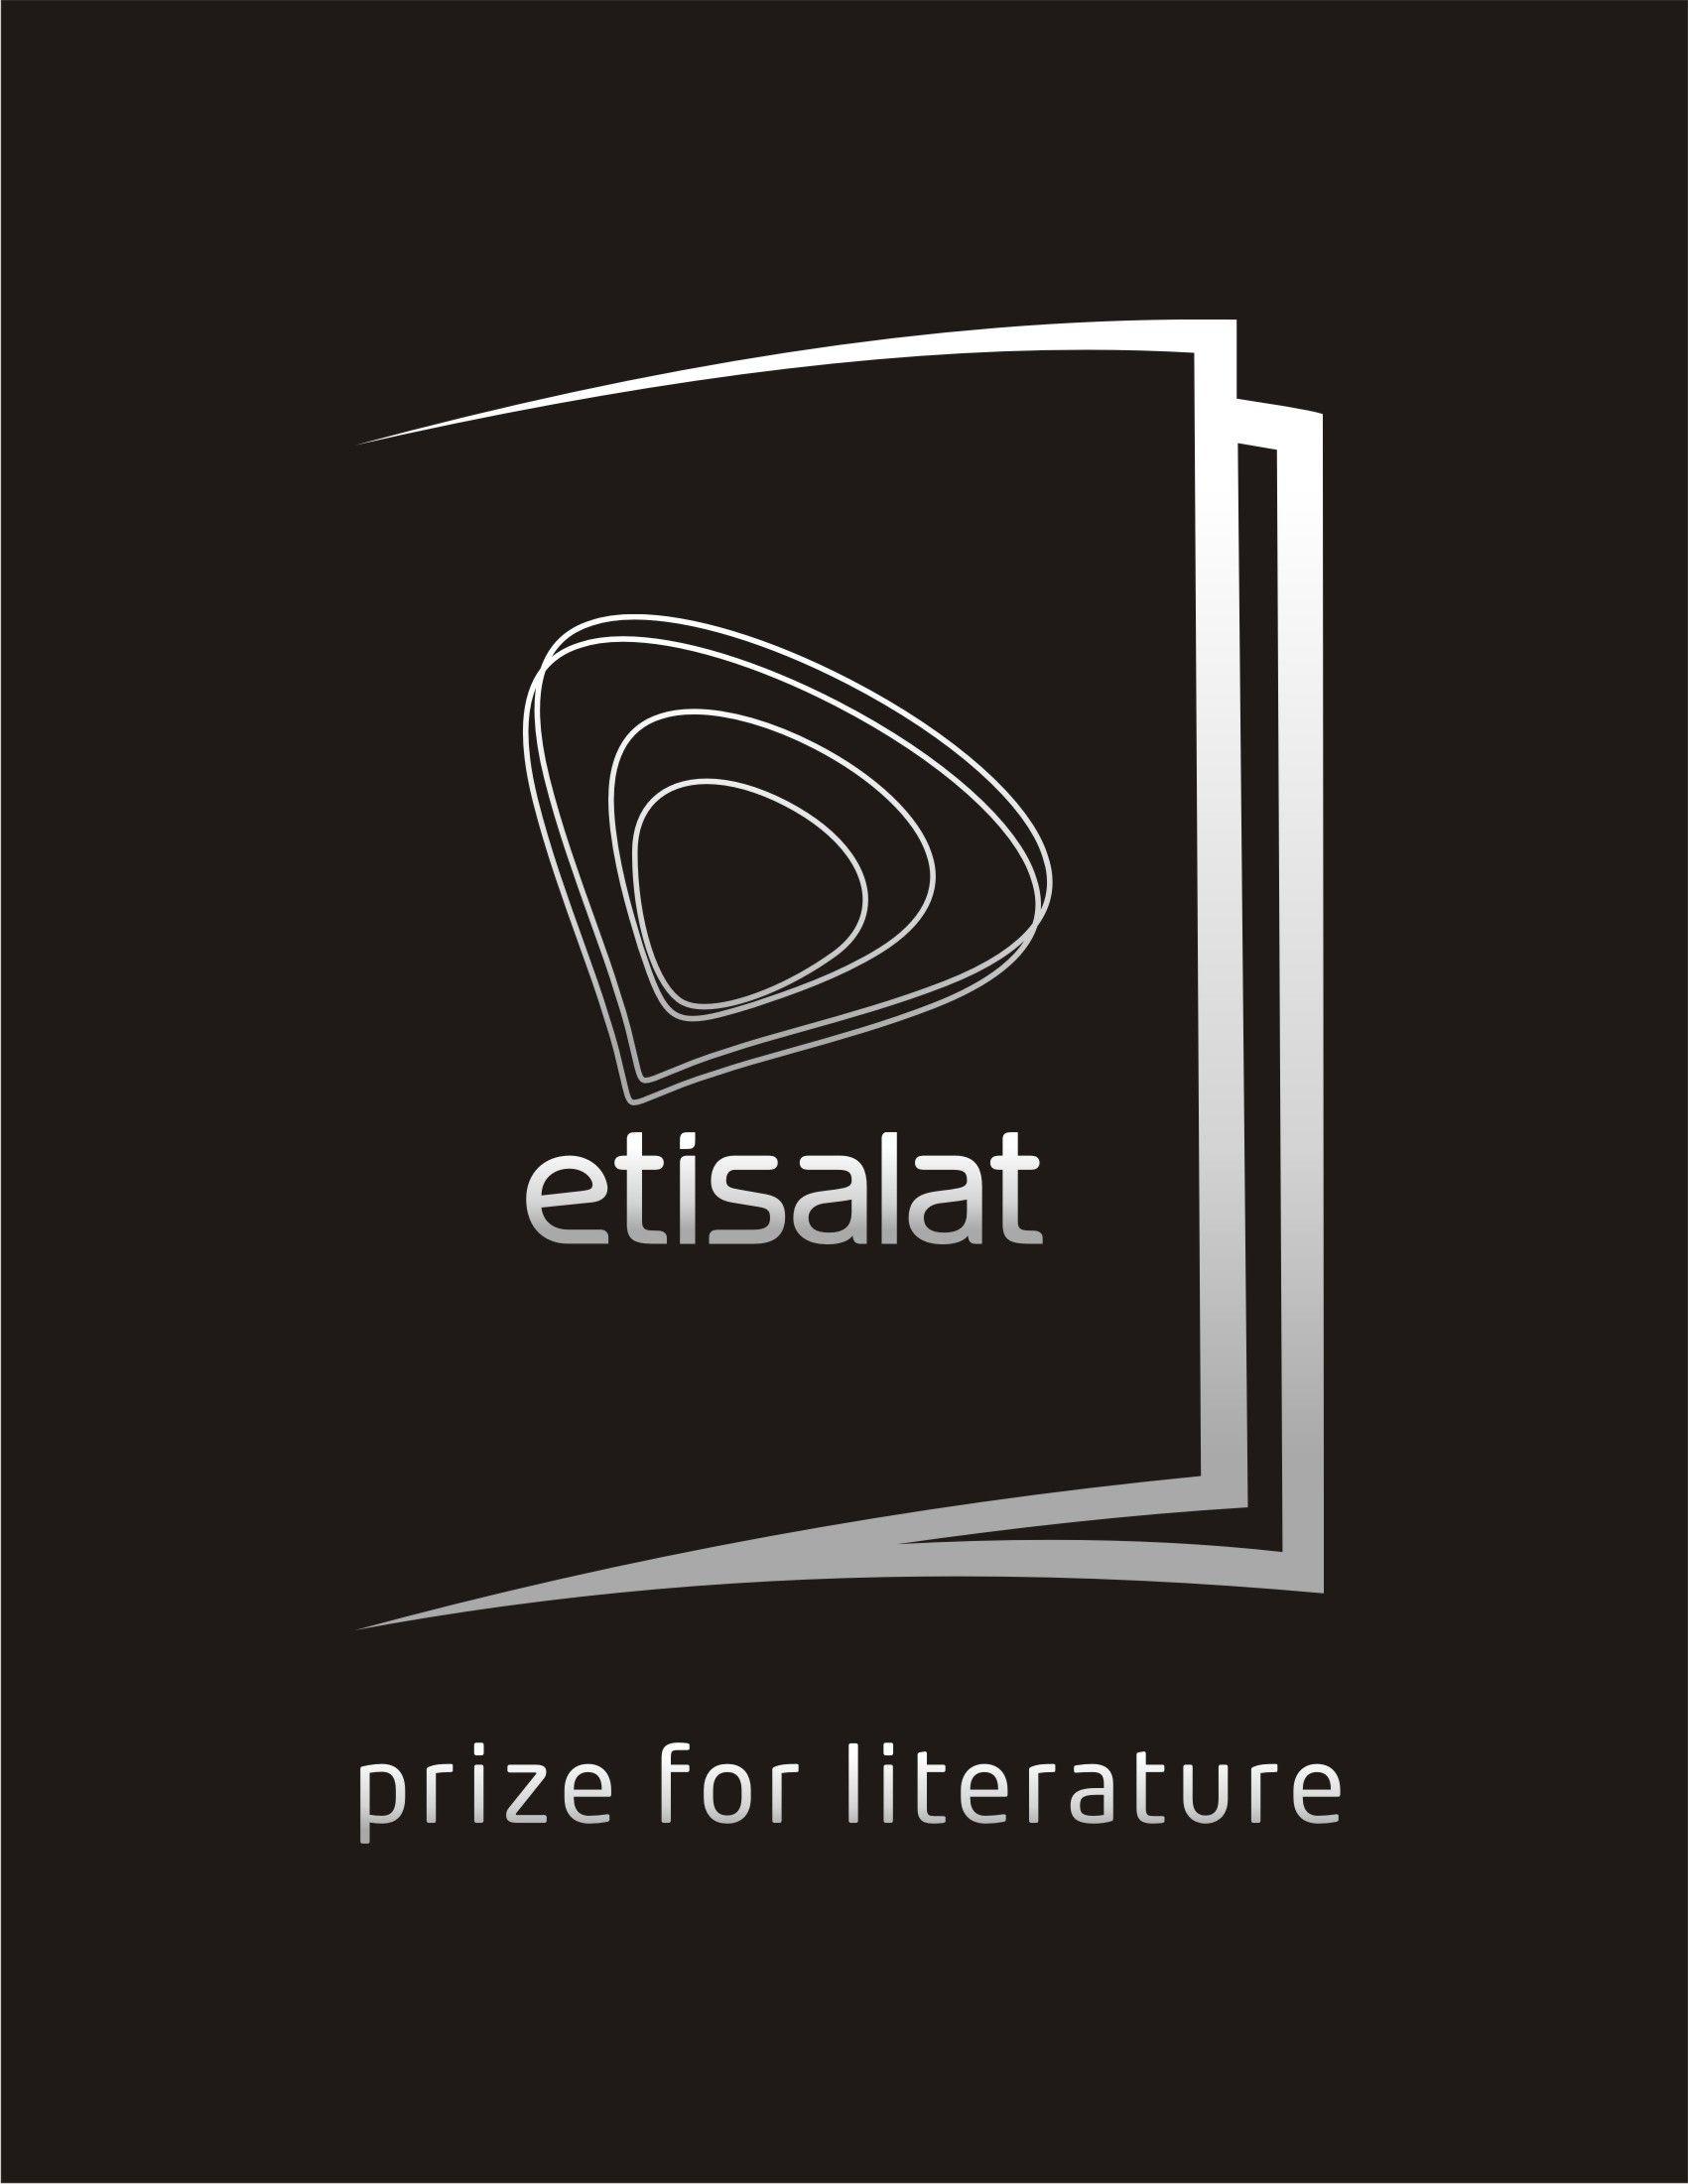 Etisalat Logo - Etisalat Prize for Literature: Call for Entries for 2014 Flash